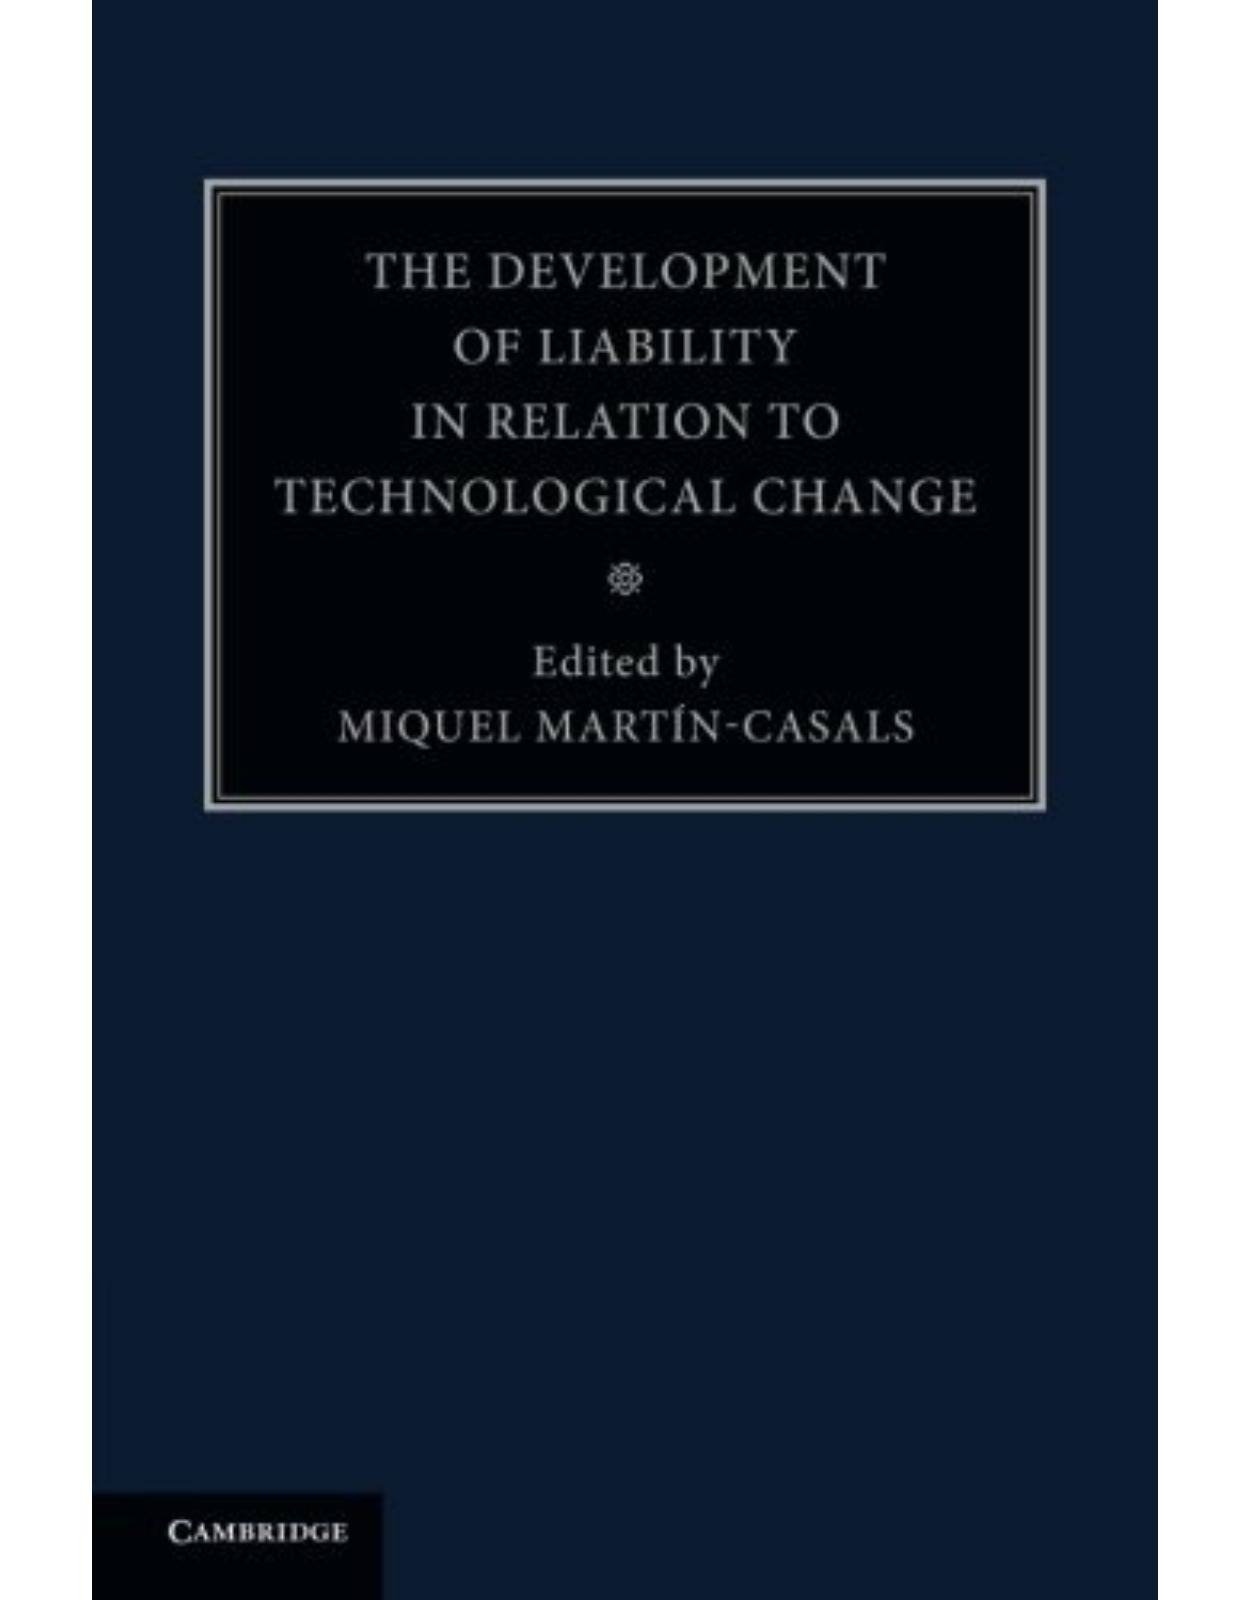 The Development of Liability in Relation to Technological Change: Volume 4